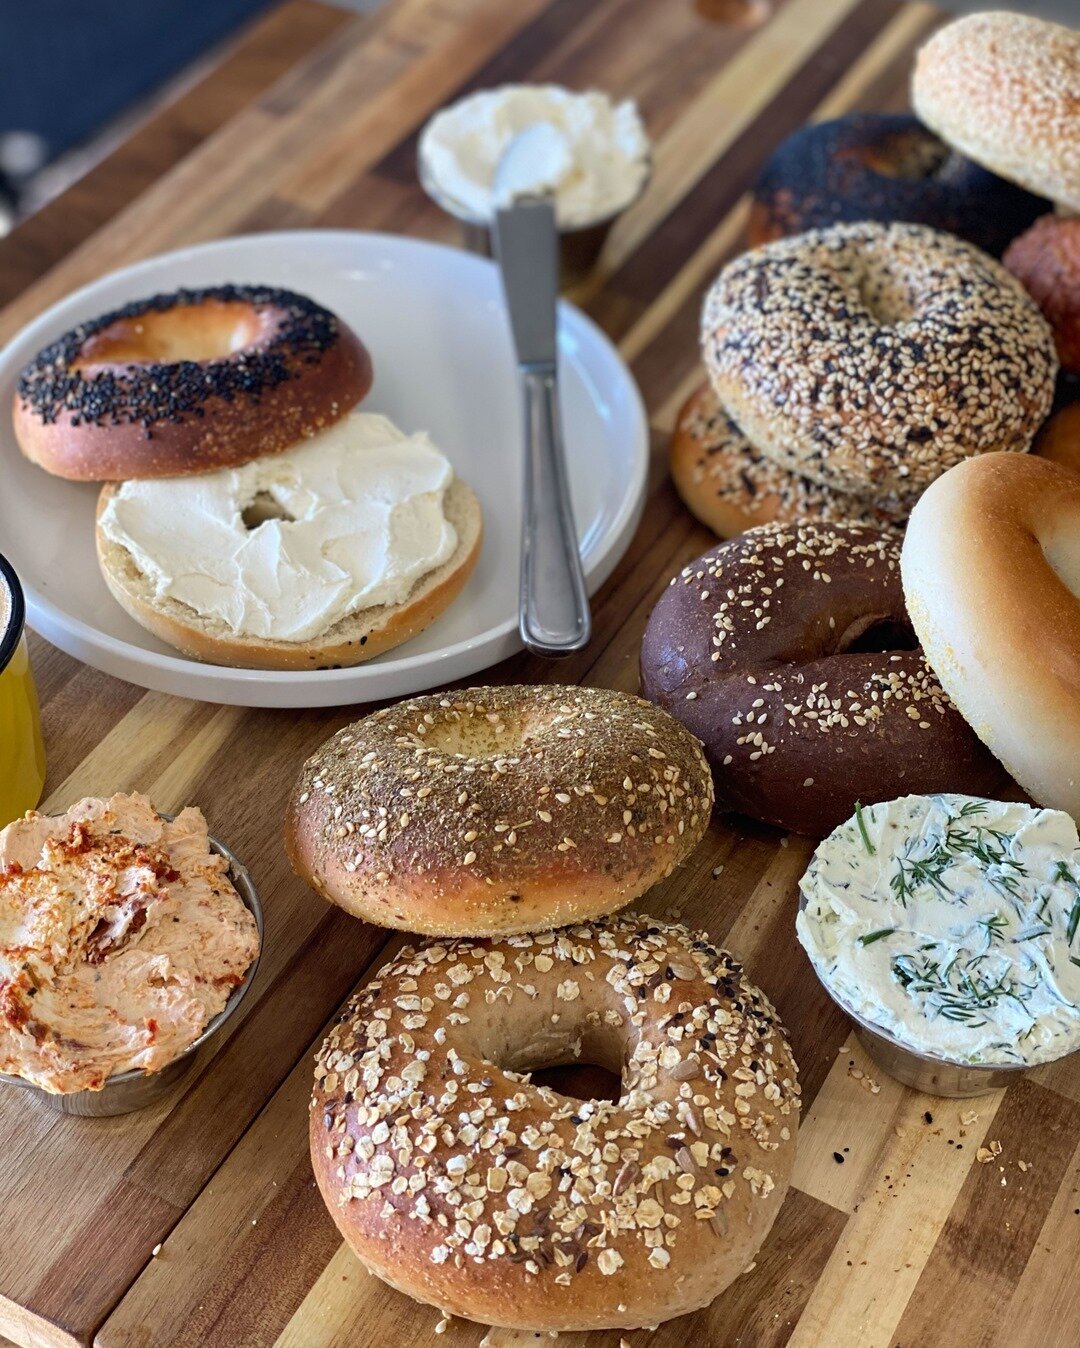 Our beautiful bagels &amp; spreads will soon be ready to order for delivery across the GTA. Every order is made fresh, in-house, and local by @buka.maranga 🇨🇦 What's your favorite type of bagel?😍🥯